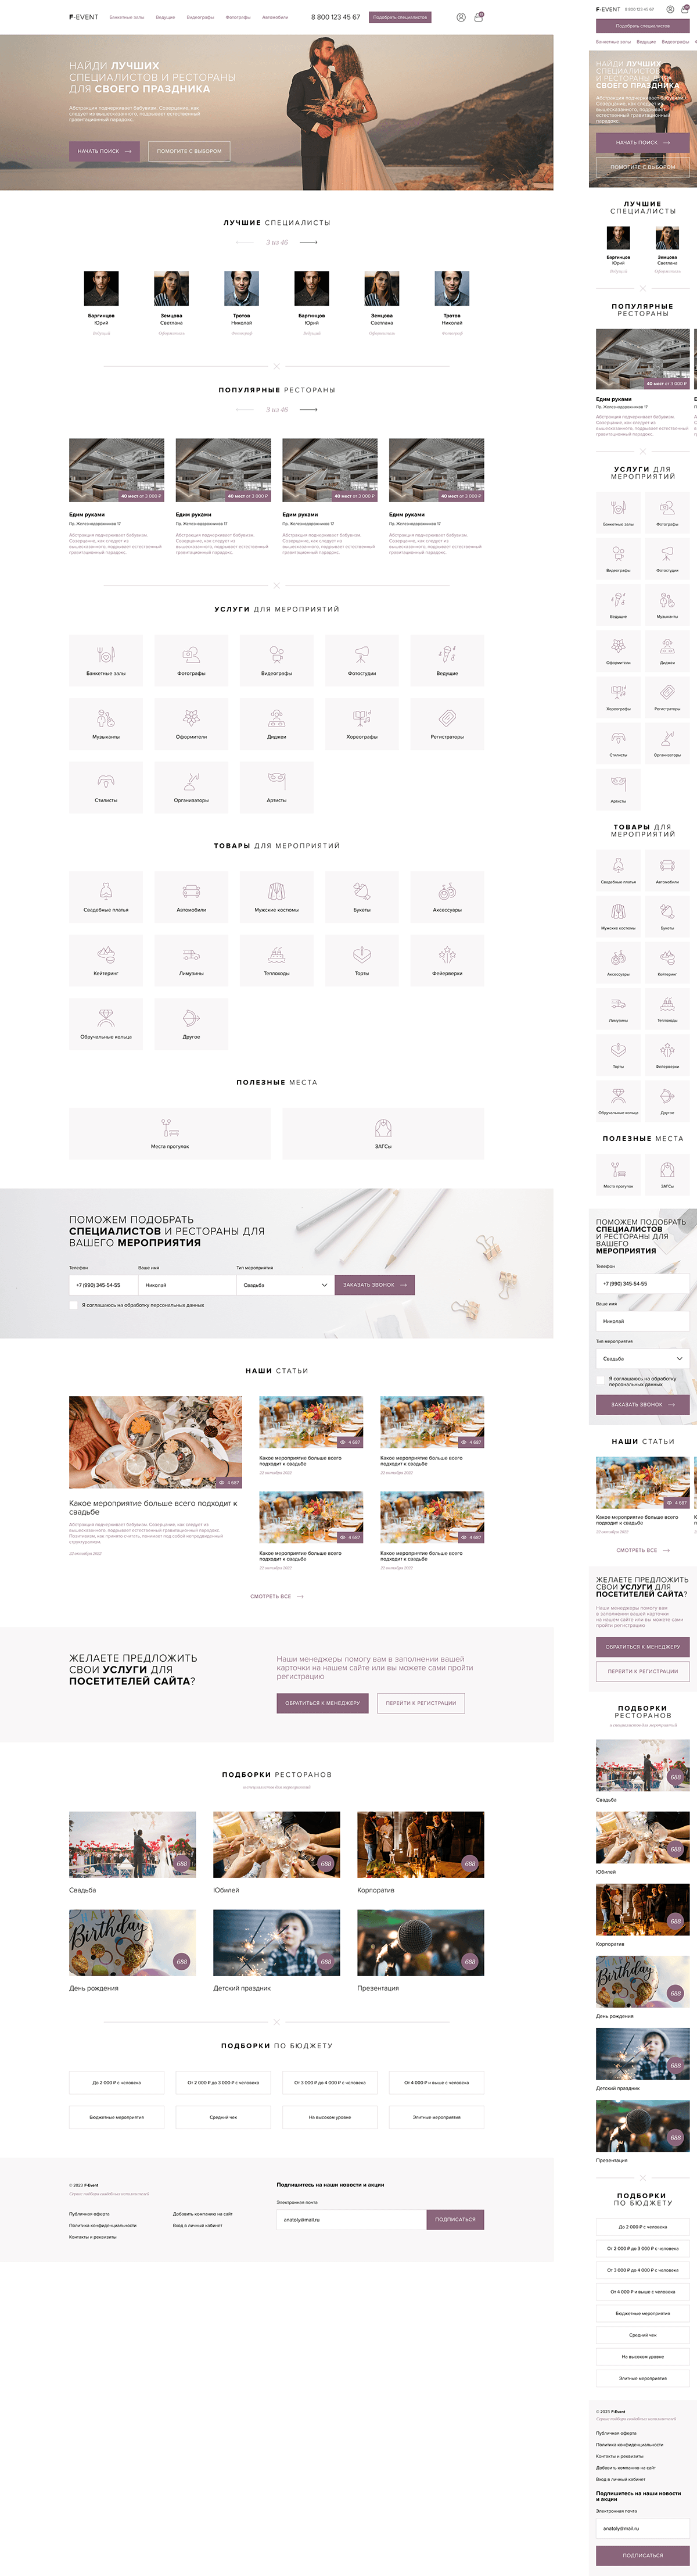 wireframes prototype UI/UX landing page UX design user experience CRM shop Education